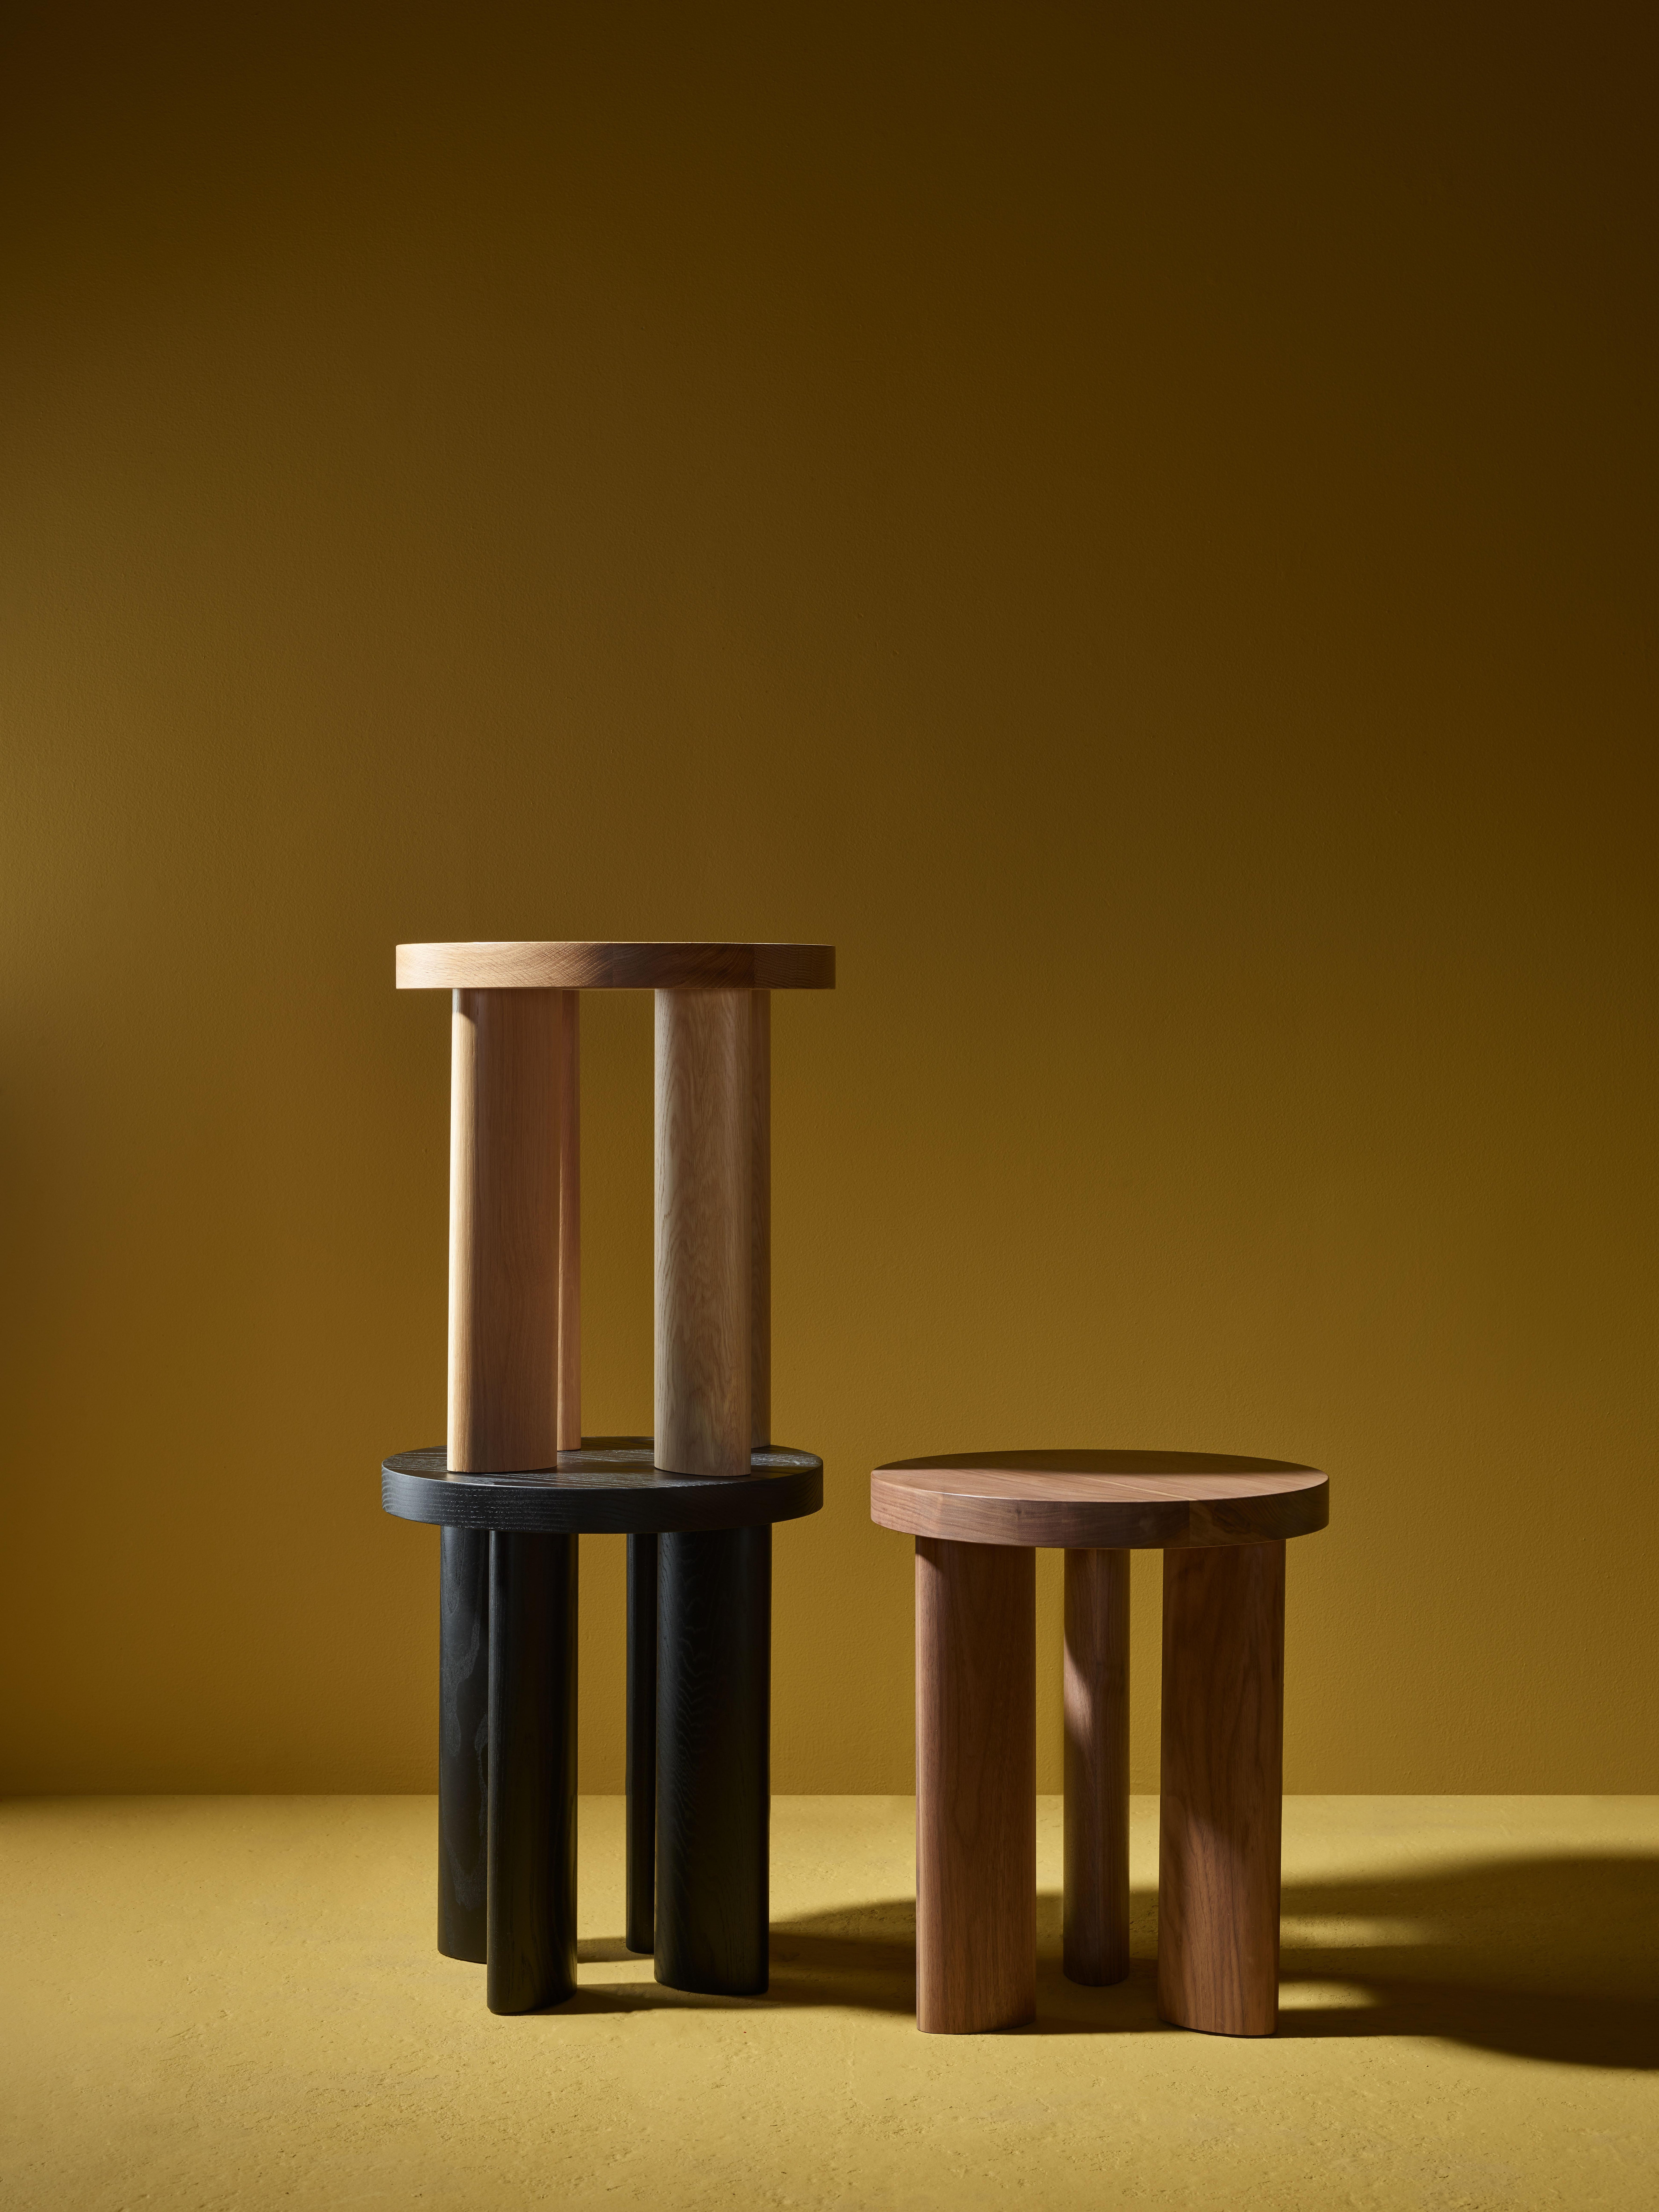 Orbit is a contemporary interpretation of Primitive elegance. Tables are made in generous scale and legs are fastened with integrated brass hardware, which provides visual punctuation. The unique elliptical leg motif is carried throughout the